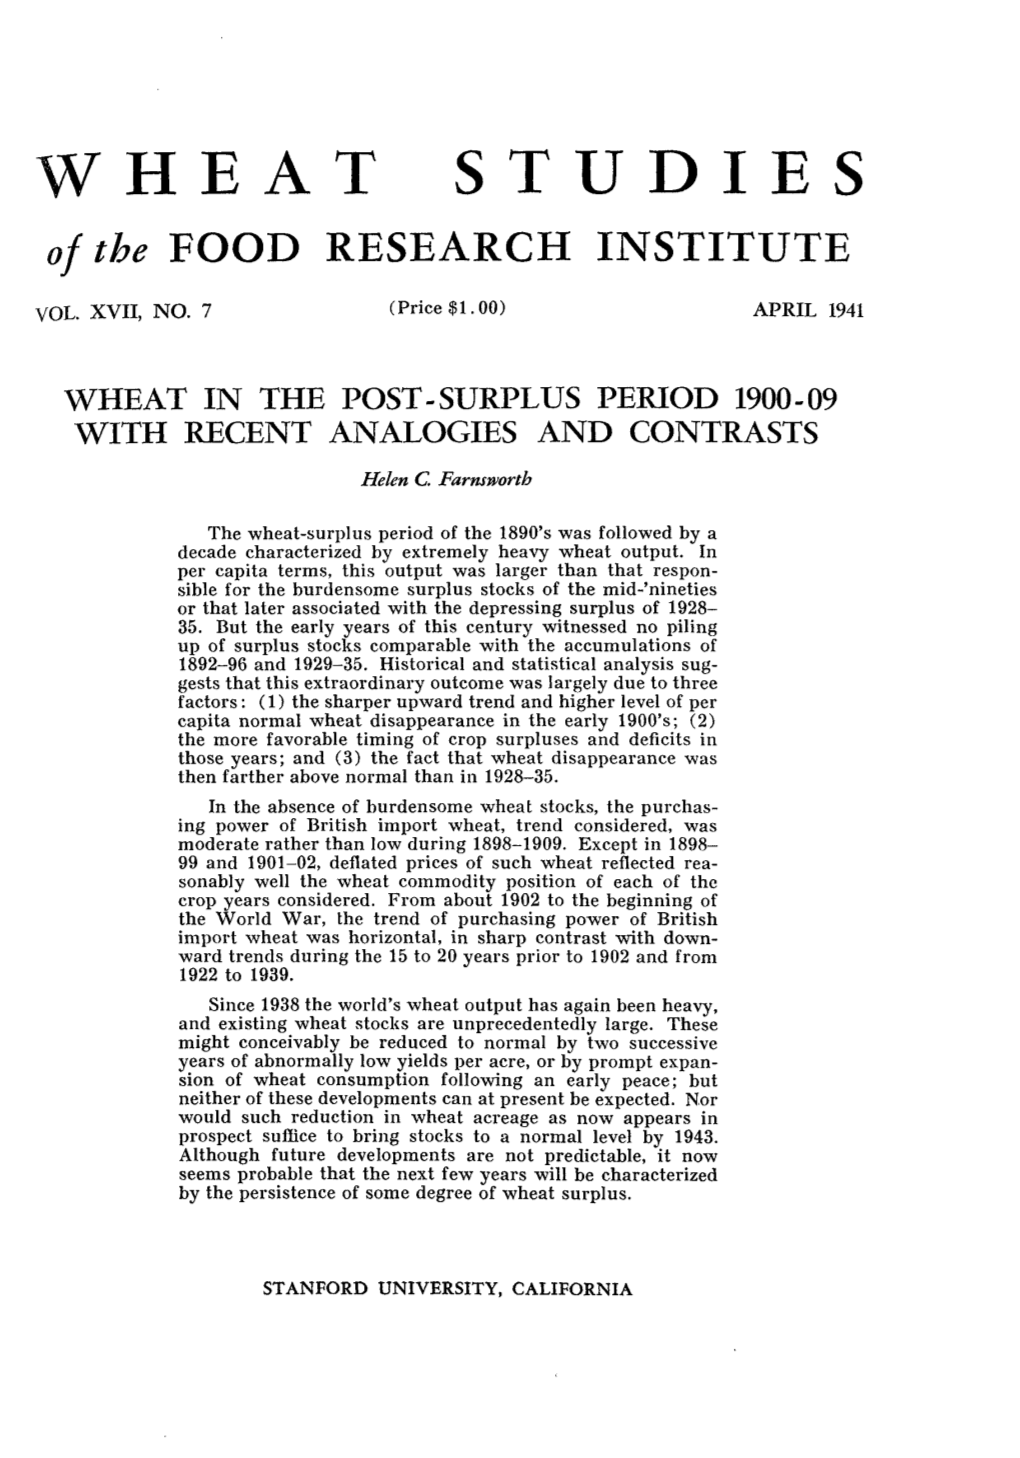 WHEAT STUDIES of the FOOD RESEARCH INSTITUTE